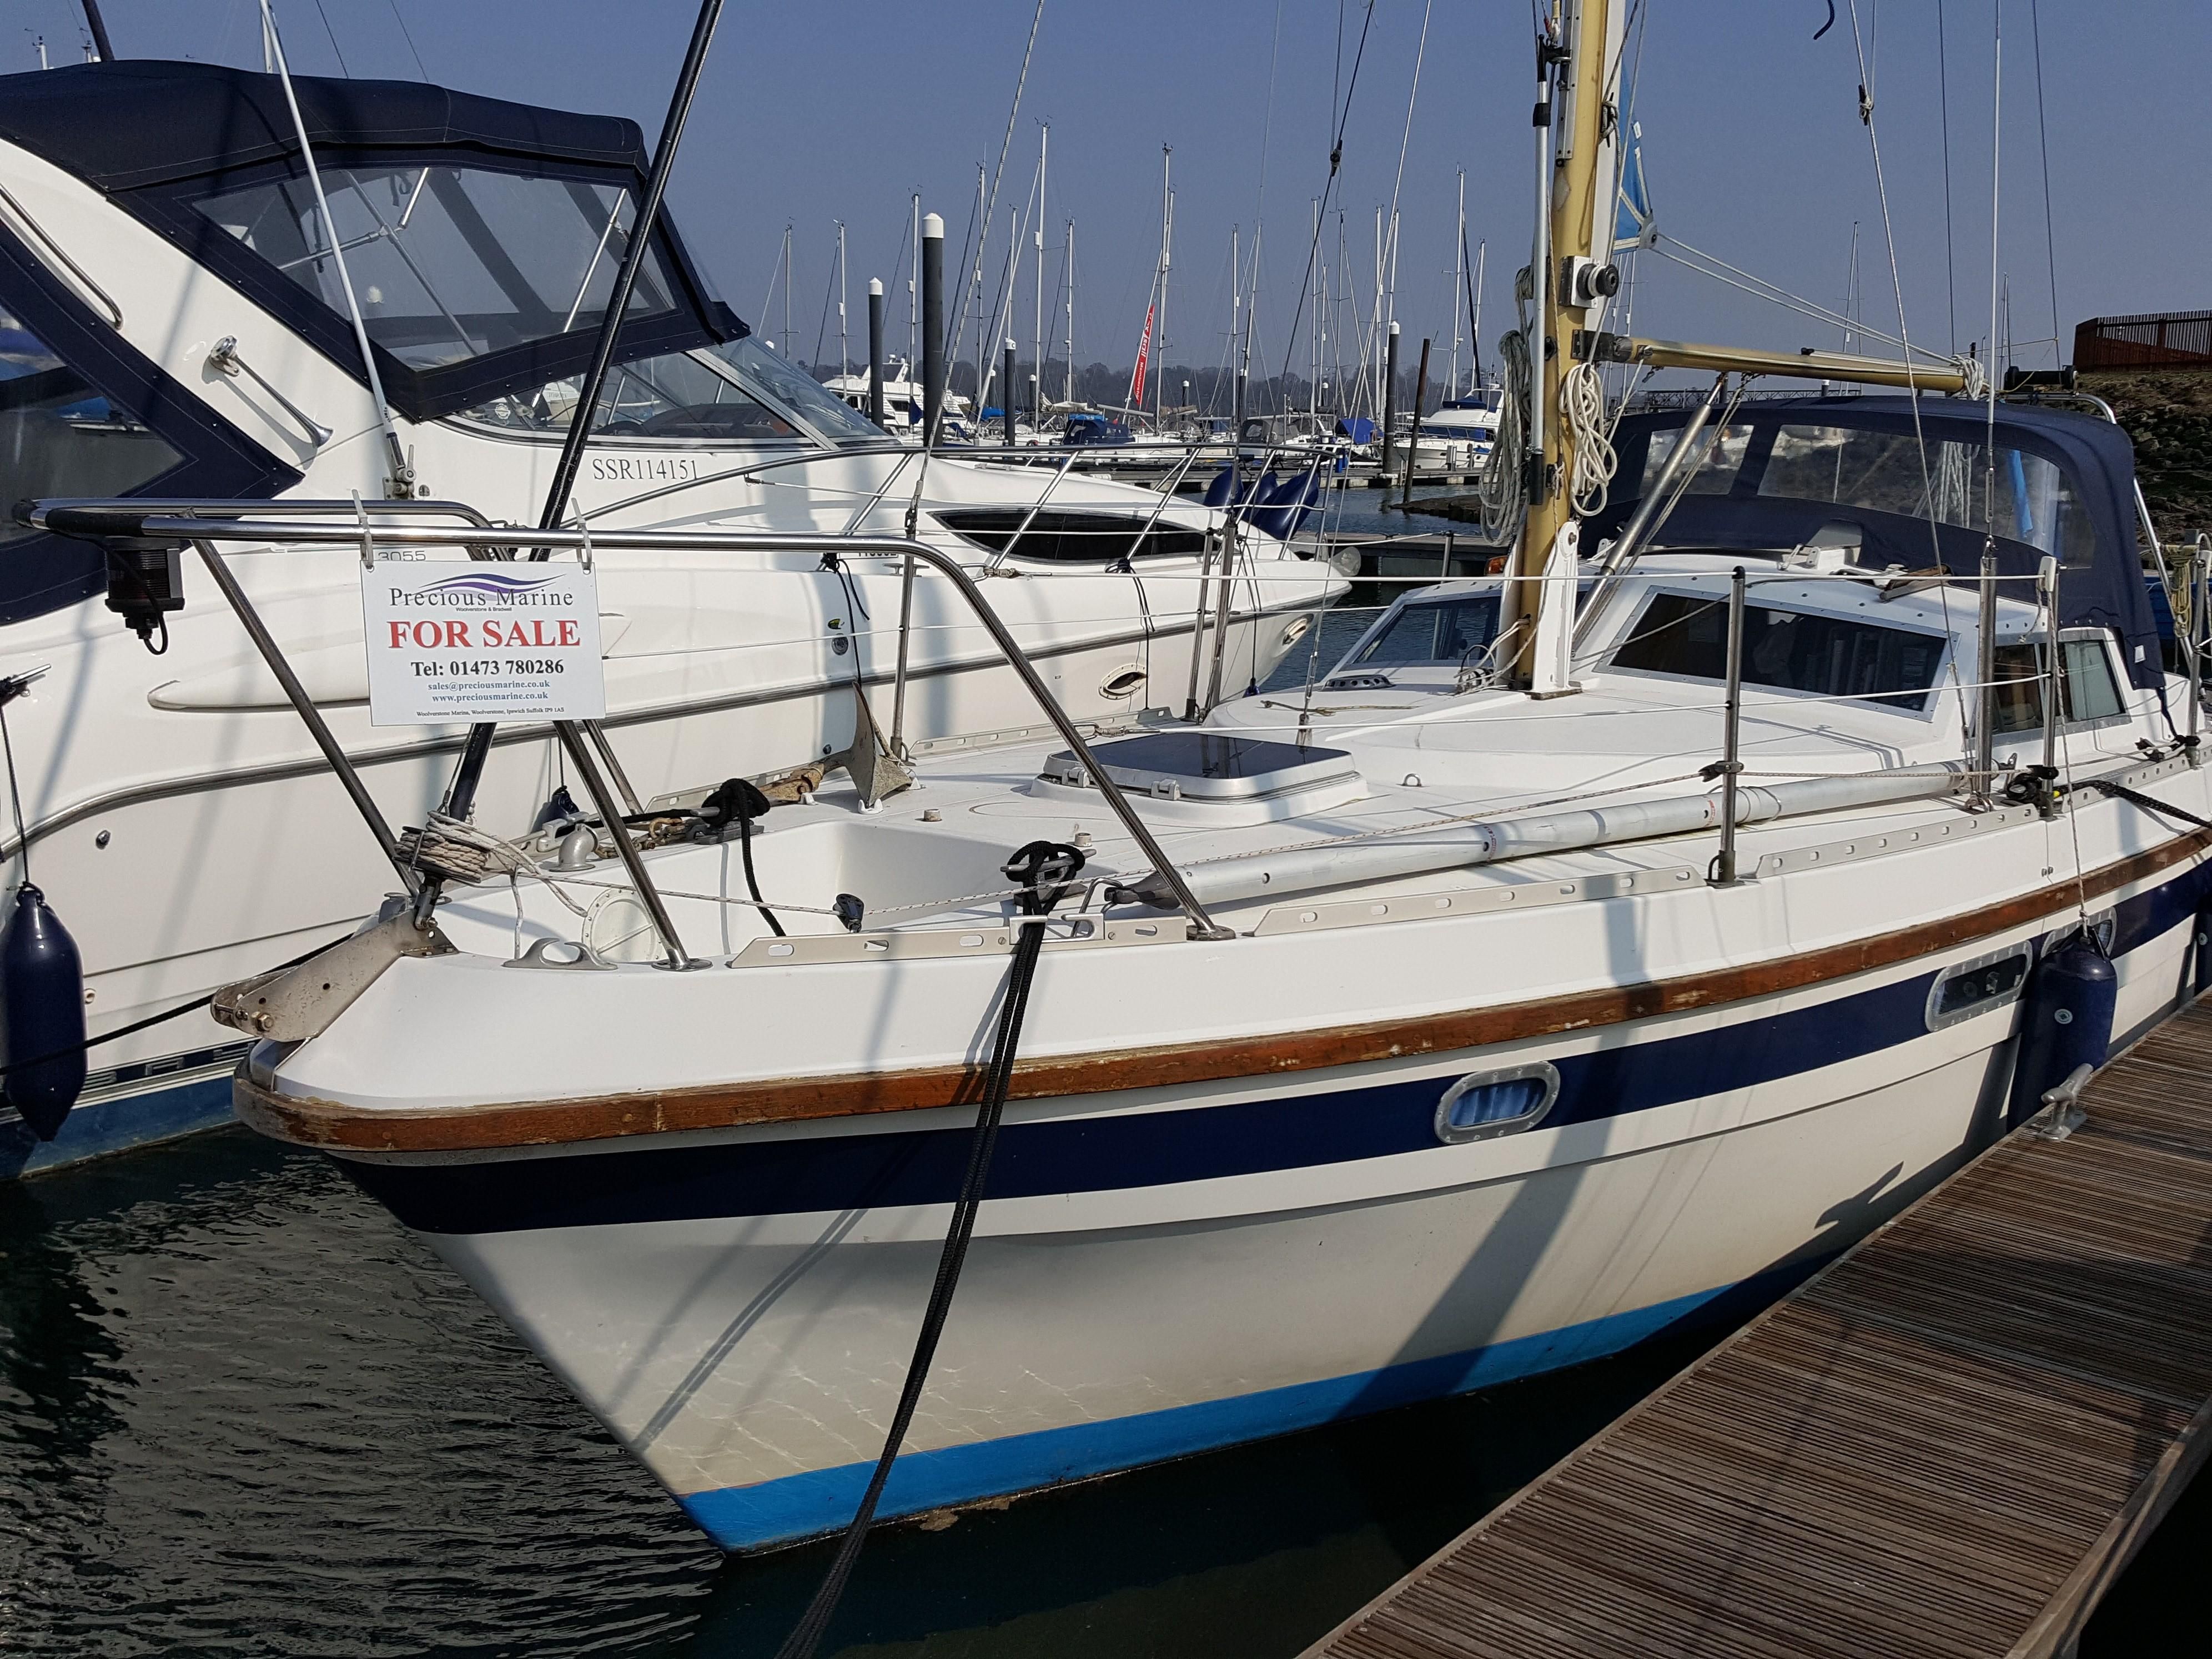 sail yacht for sale uk